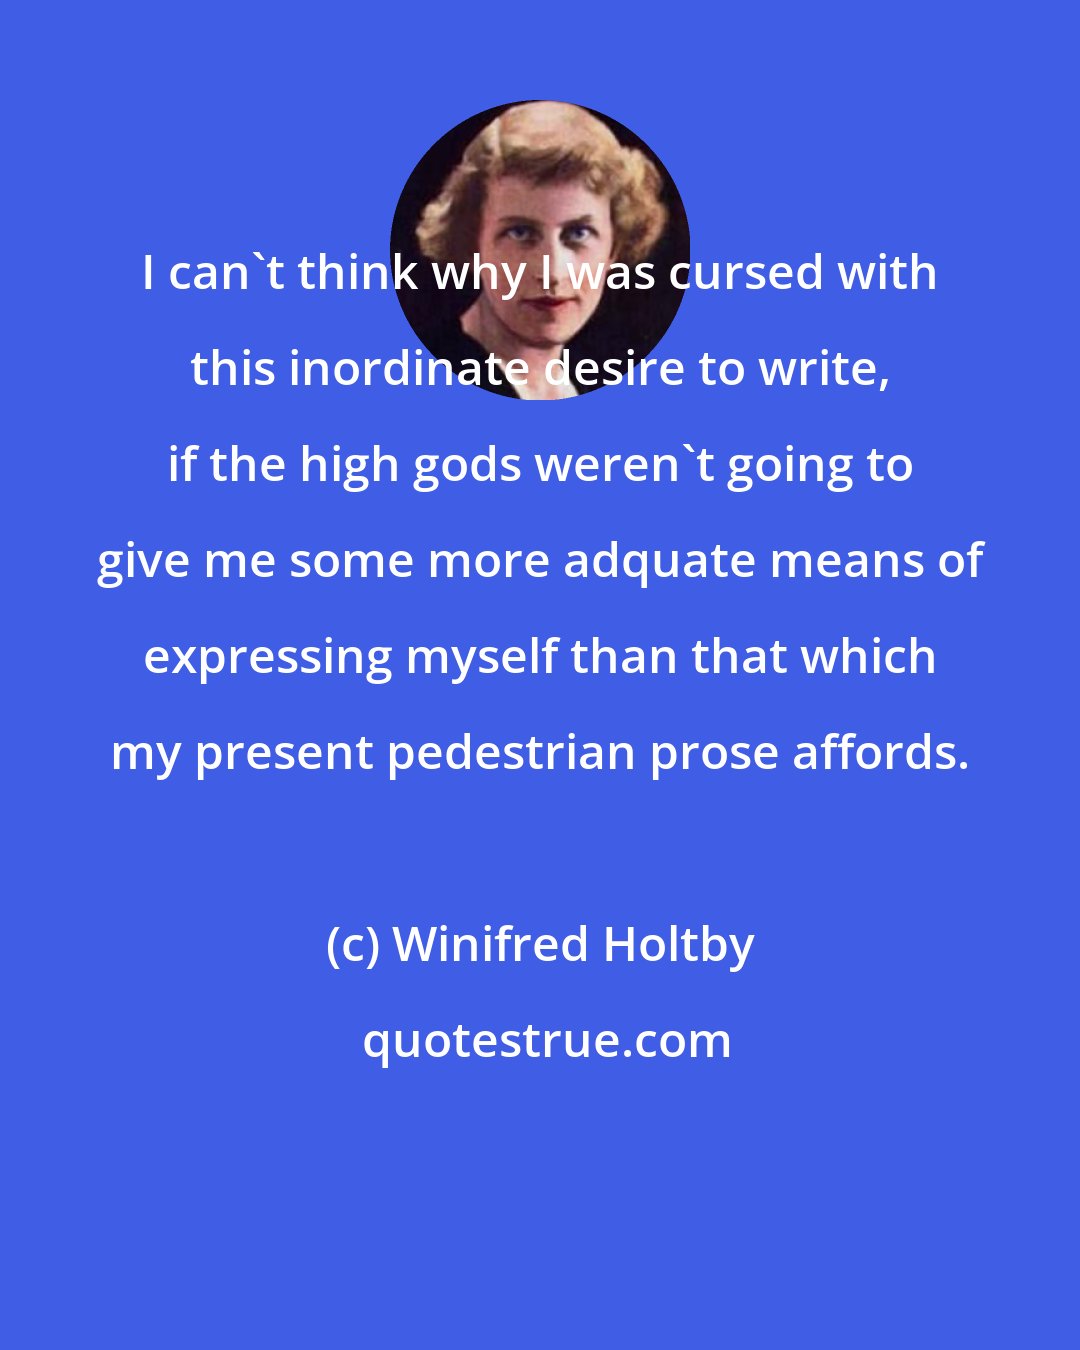 Winifred Holtby: I can't think why I was cursed with this inordinate desire to write, if the high gods weren't going to give me some more adquate means of expressing myself than that which my present pedestrian prose affords.